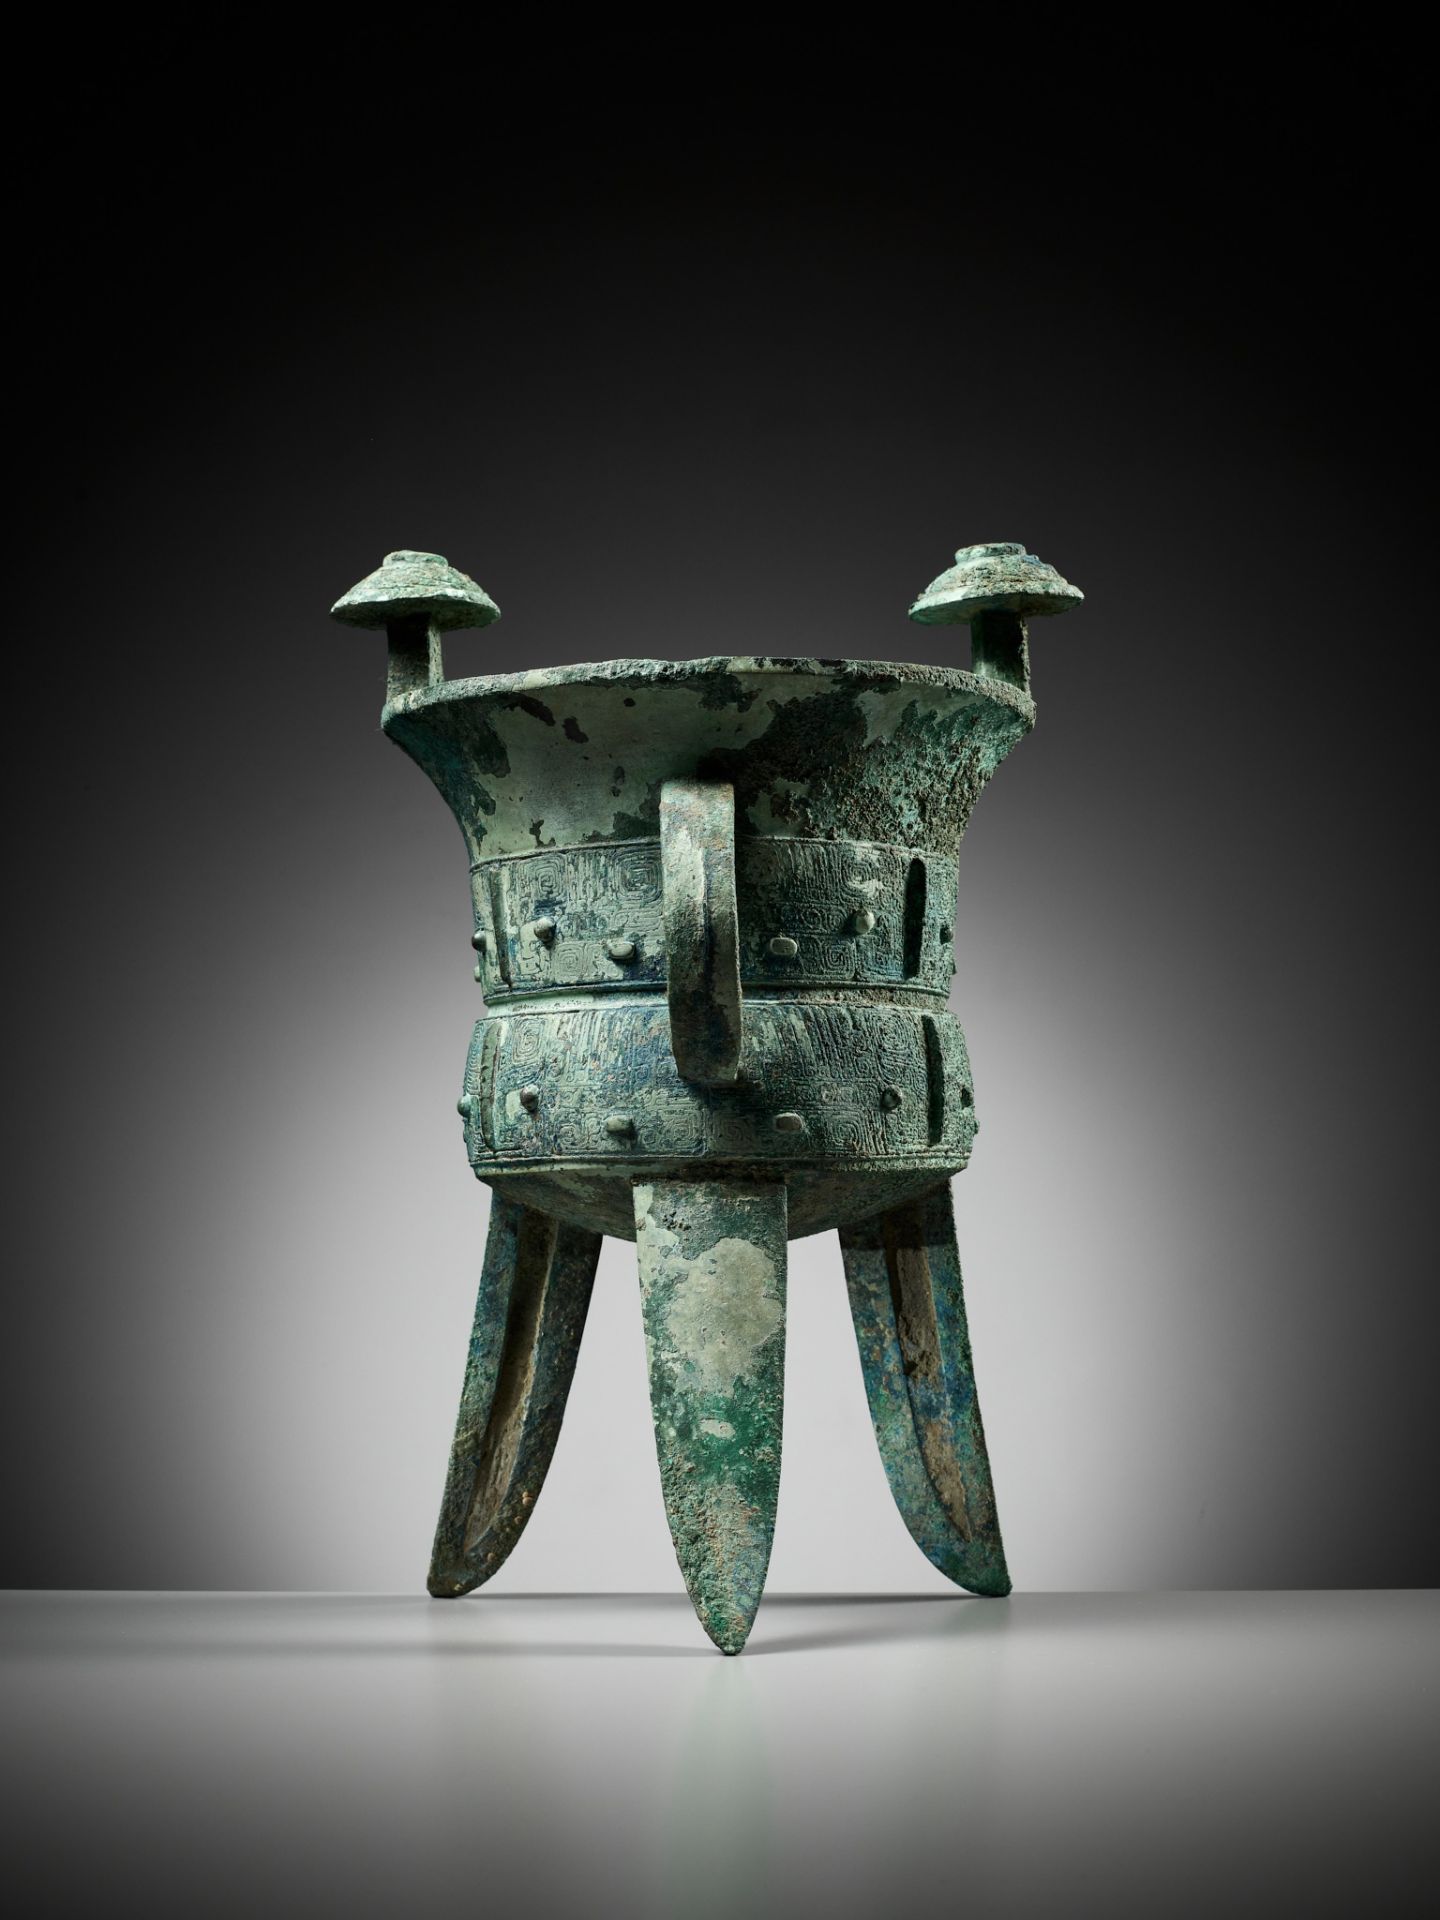 AN EXCEPTIONALLY LARGE AND MASSIVE BRONZE RITUAL TRIPOD WINE VESSEL, JIA, WITH A CLAN MARK, SHANG - Image 9 of 29